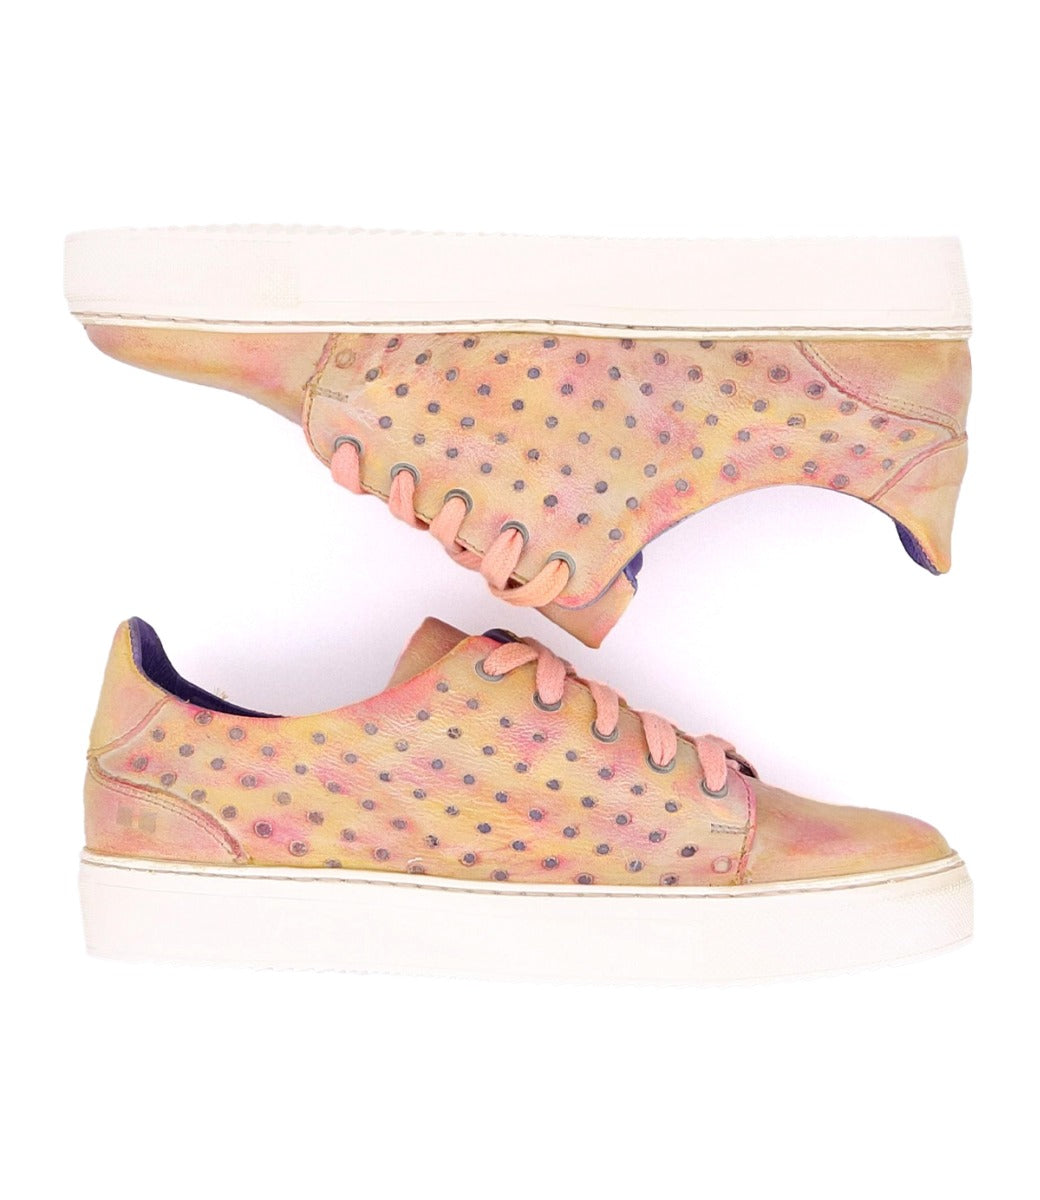 A pair of Lyne sneakers with polka dots on them from Bed Stu.